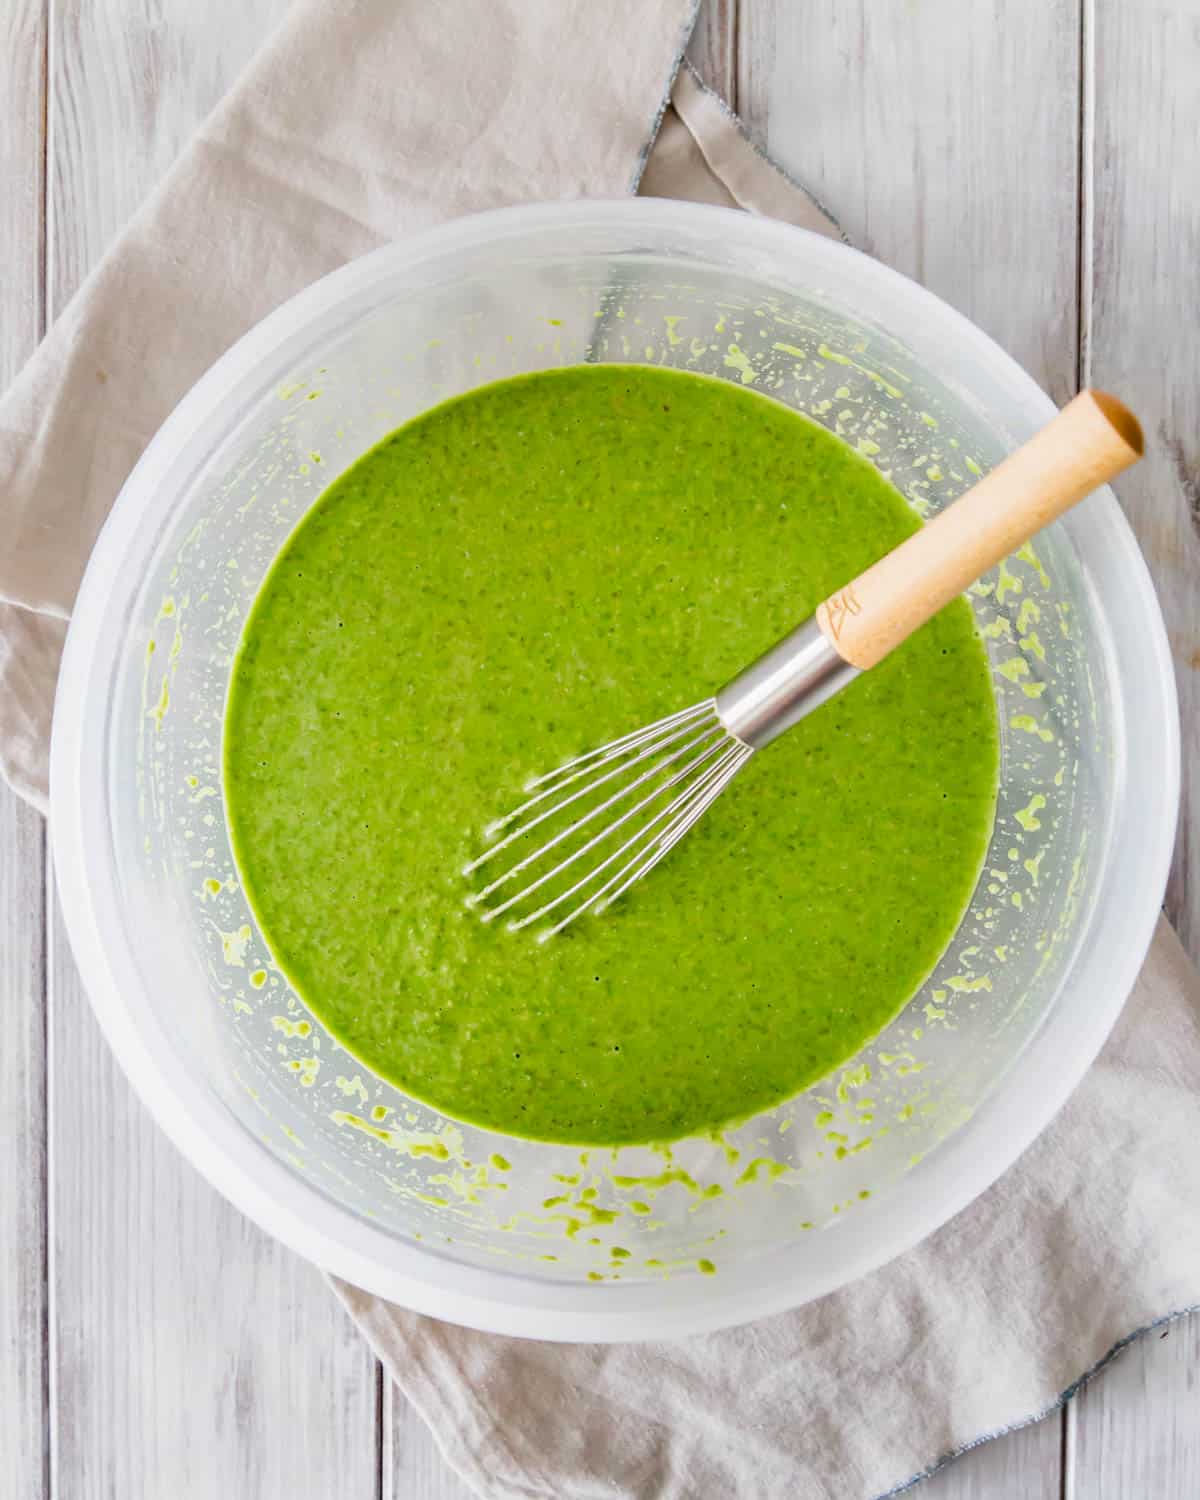 Mix the spinach pancake batter together and let it rest for 5 minutes before cooking.